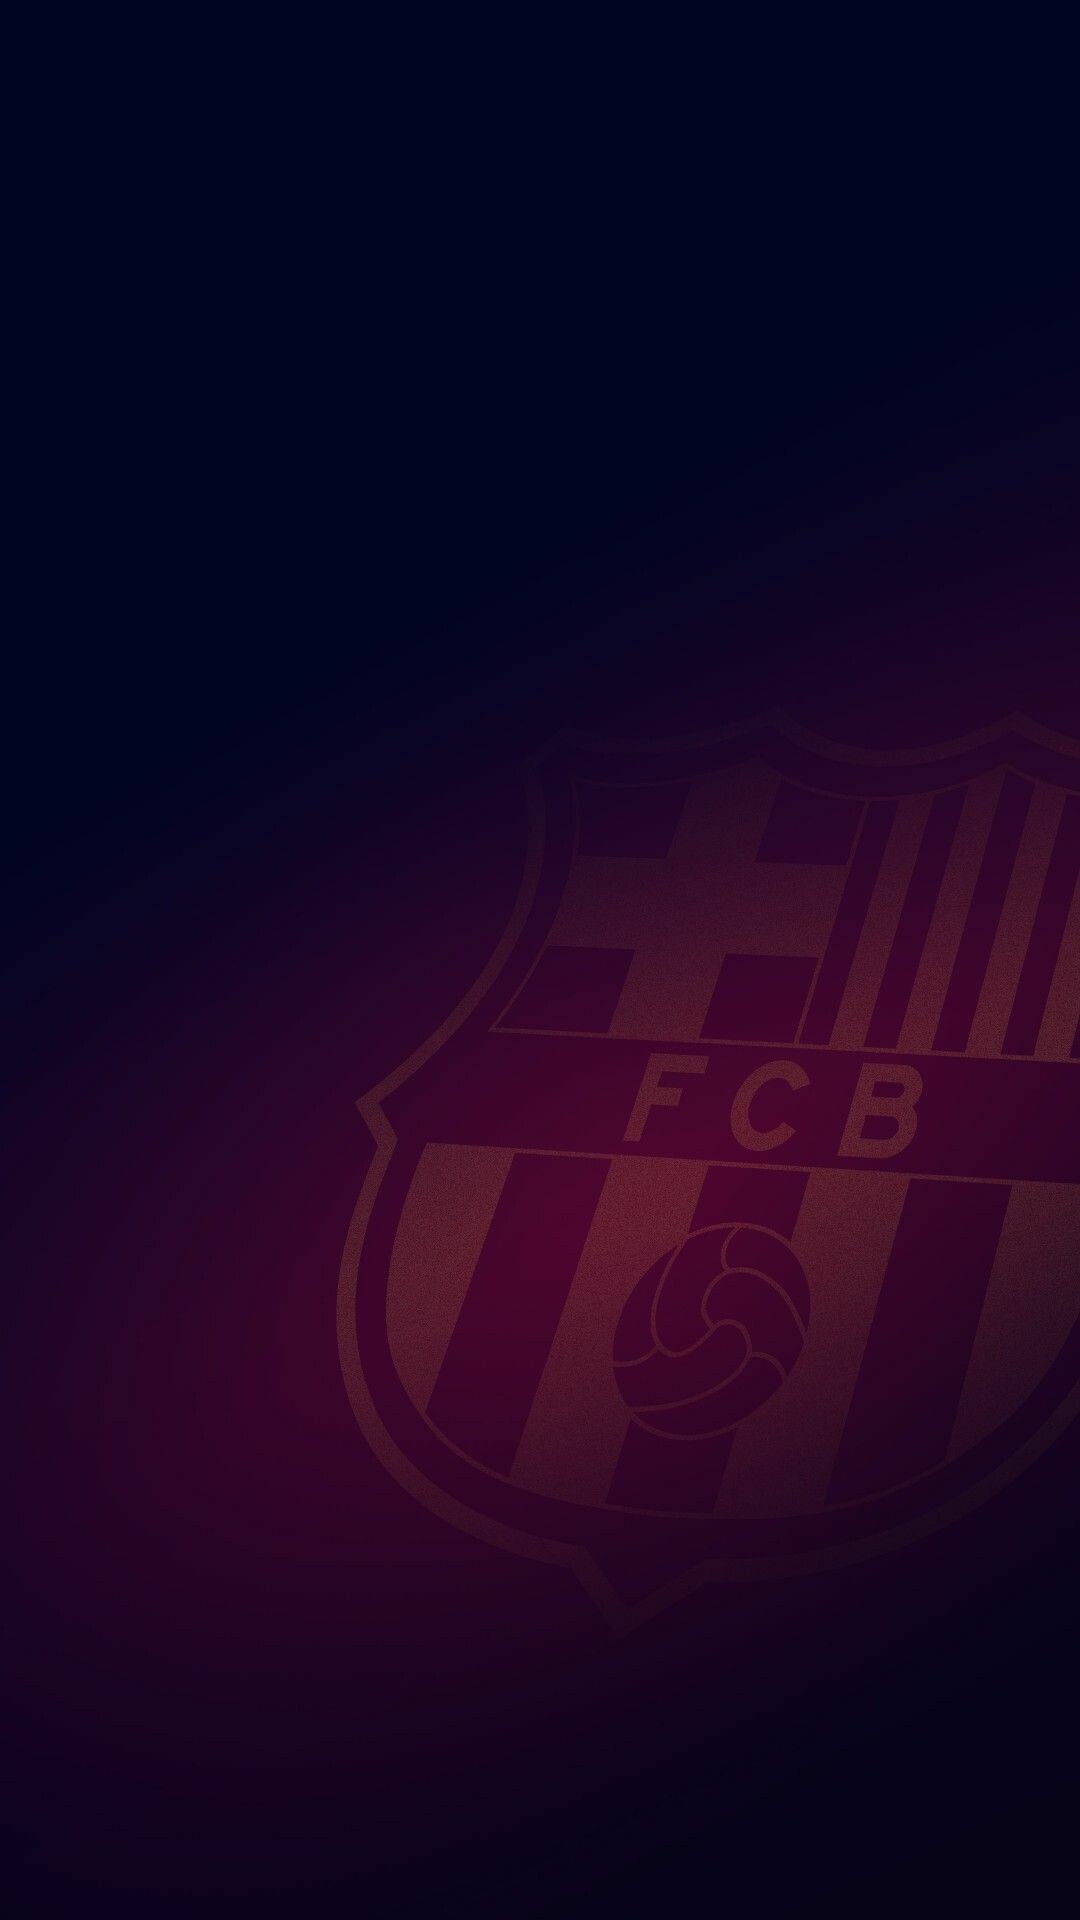 FC Barcelona: One of the most popular teams on social media, Blaugrana. 1080x1920 Full HD Background.